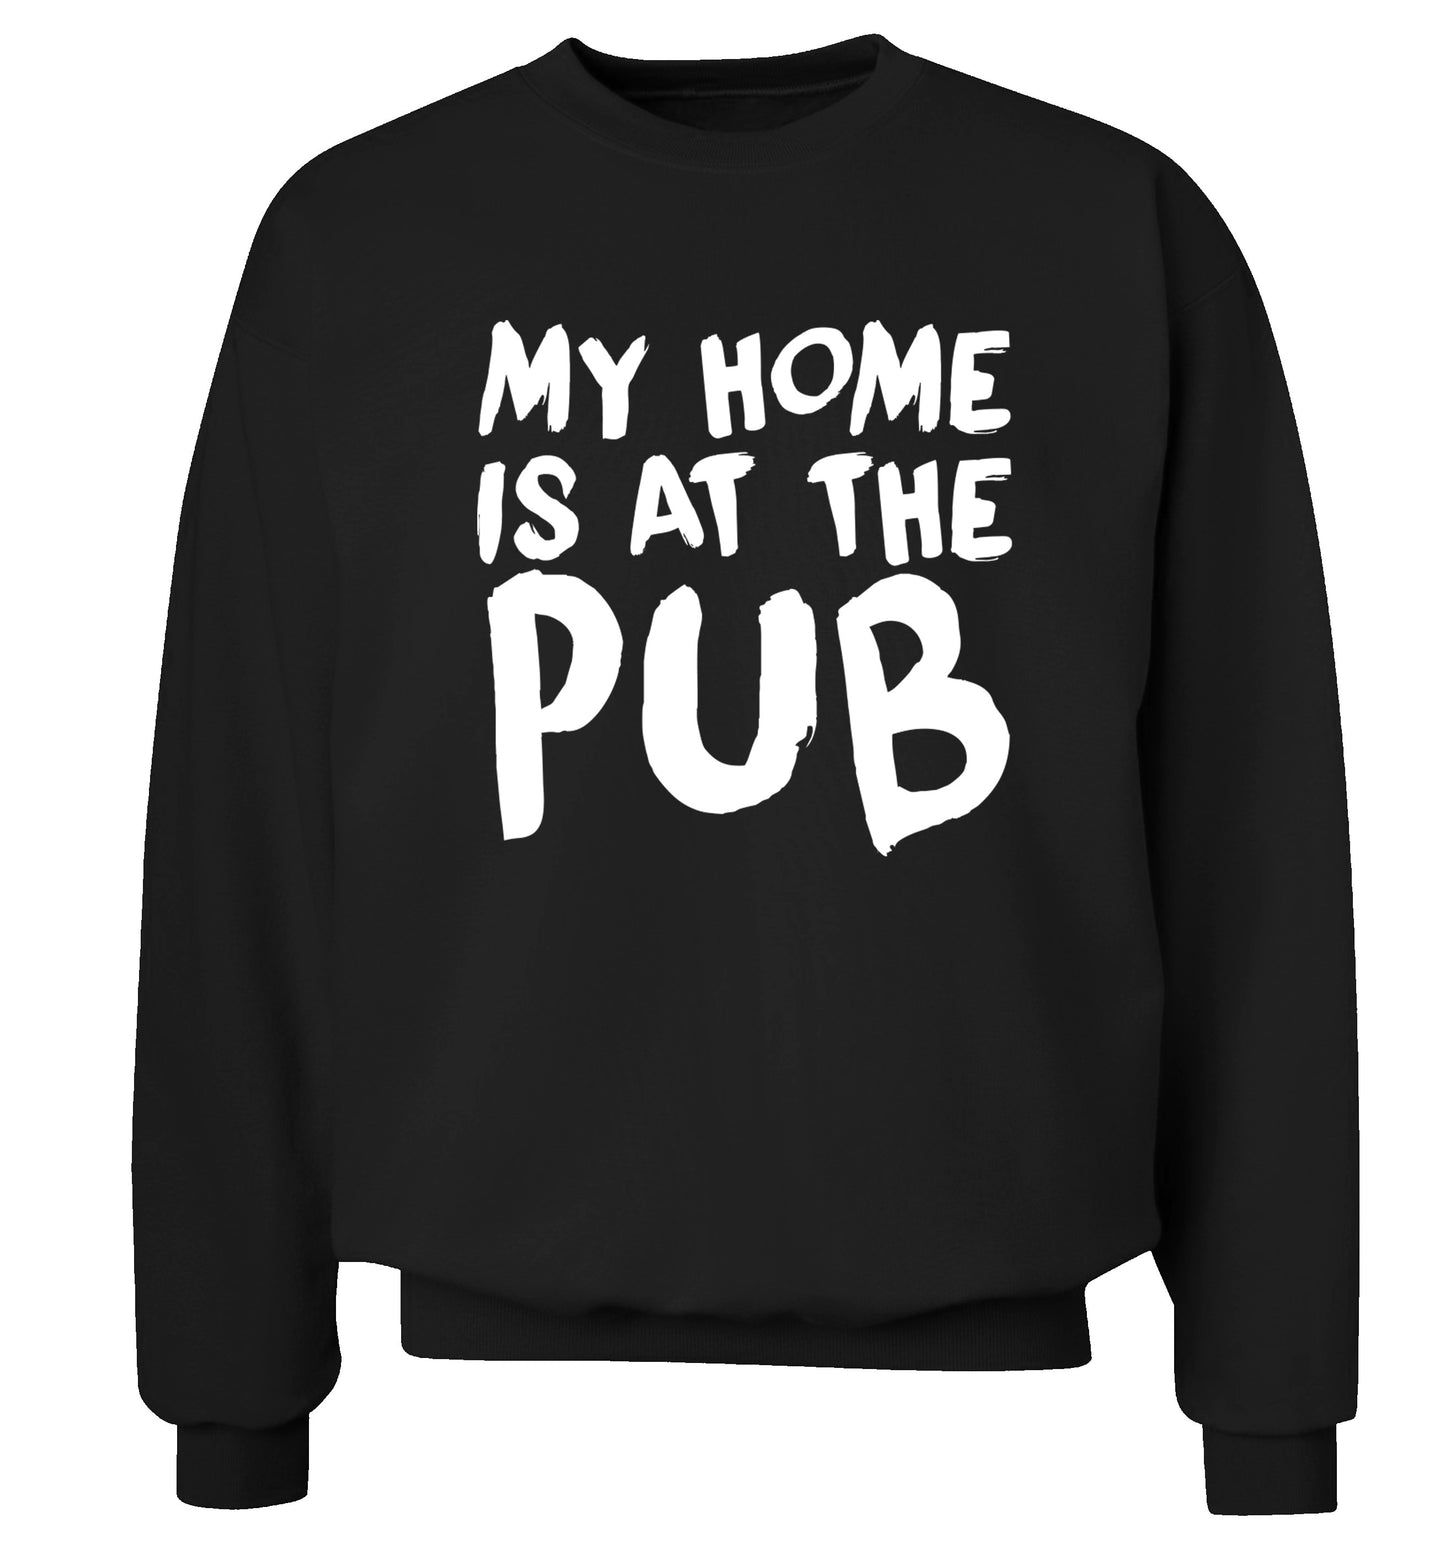 My home is at the pub Adult's unisex black Sweater 2XL